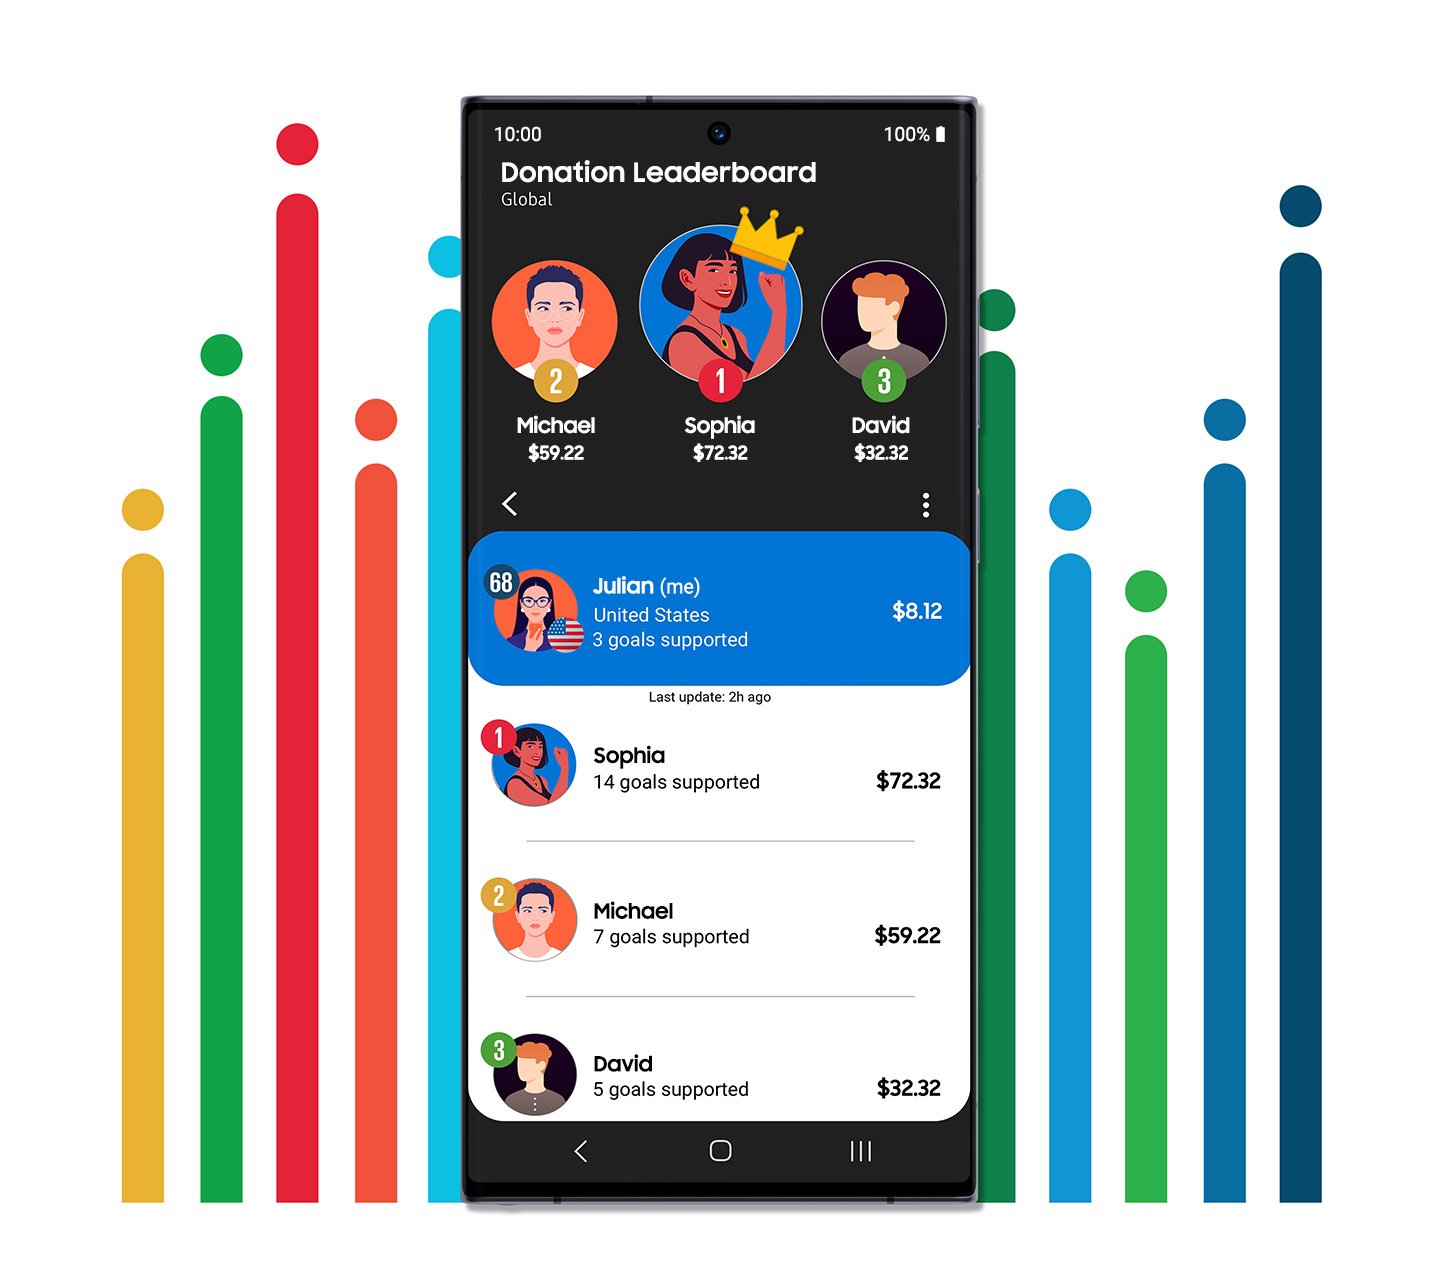 New App Donation Leaderboard Feature of Samsung Global Goals App